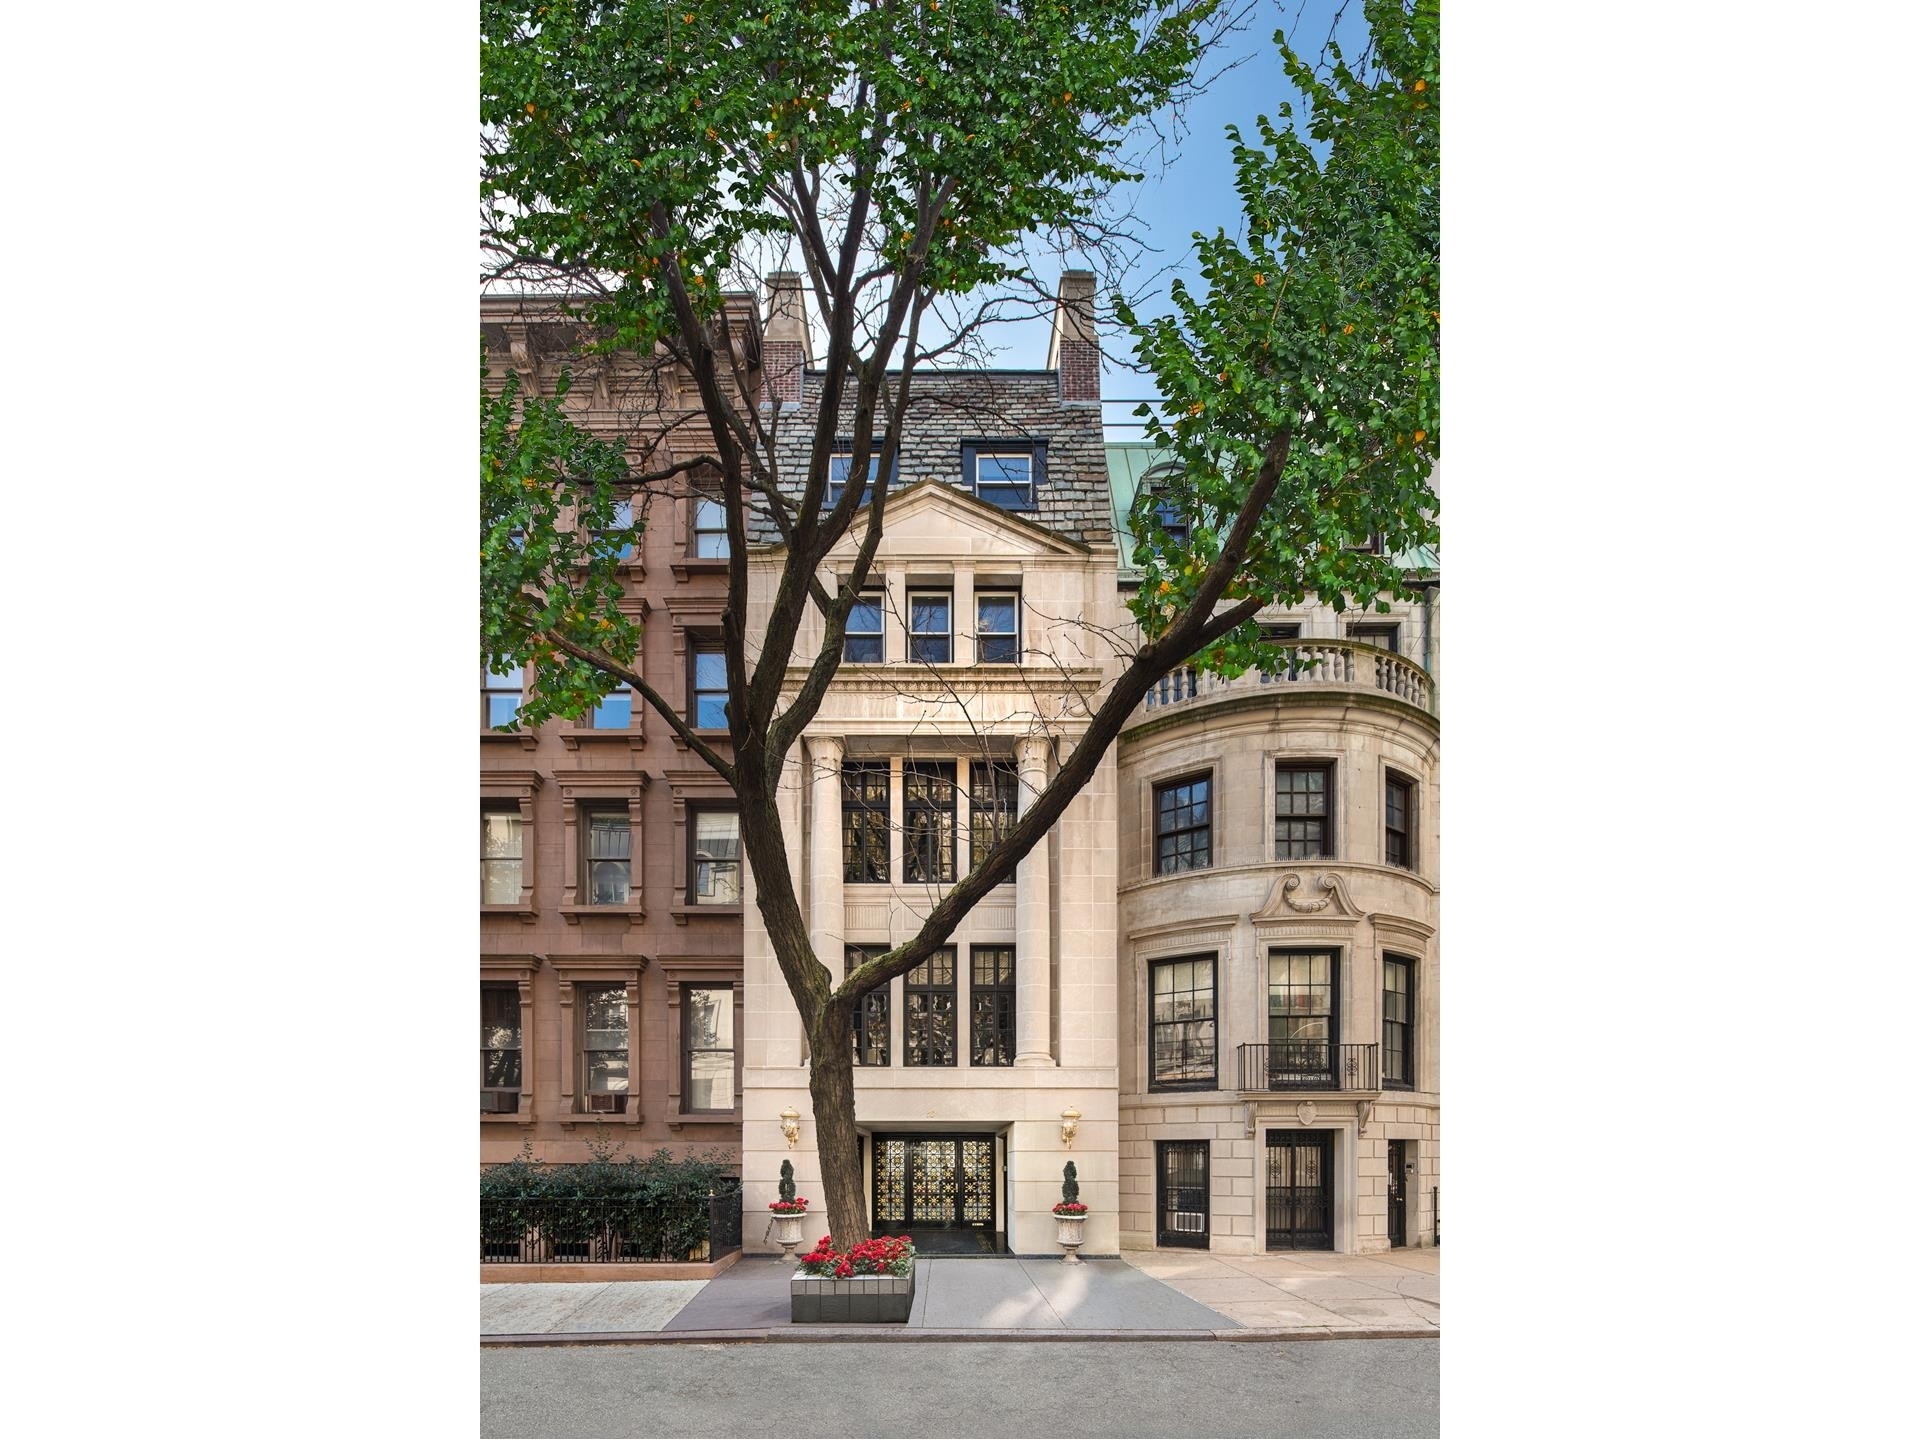 Single Family Townhouse for Sale at 10 E 64TH ST, TOWNHOUSE Lenox Hill, New York, New York 10065